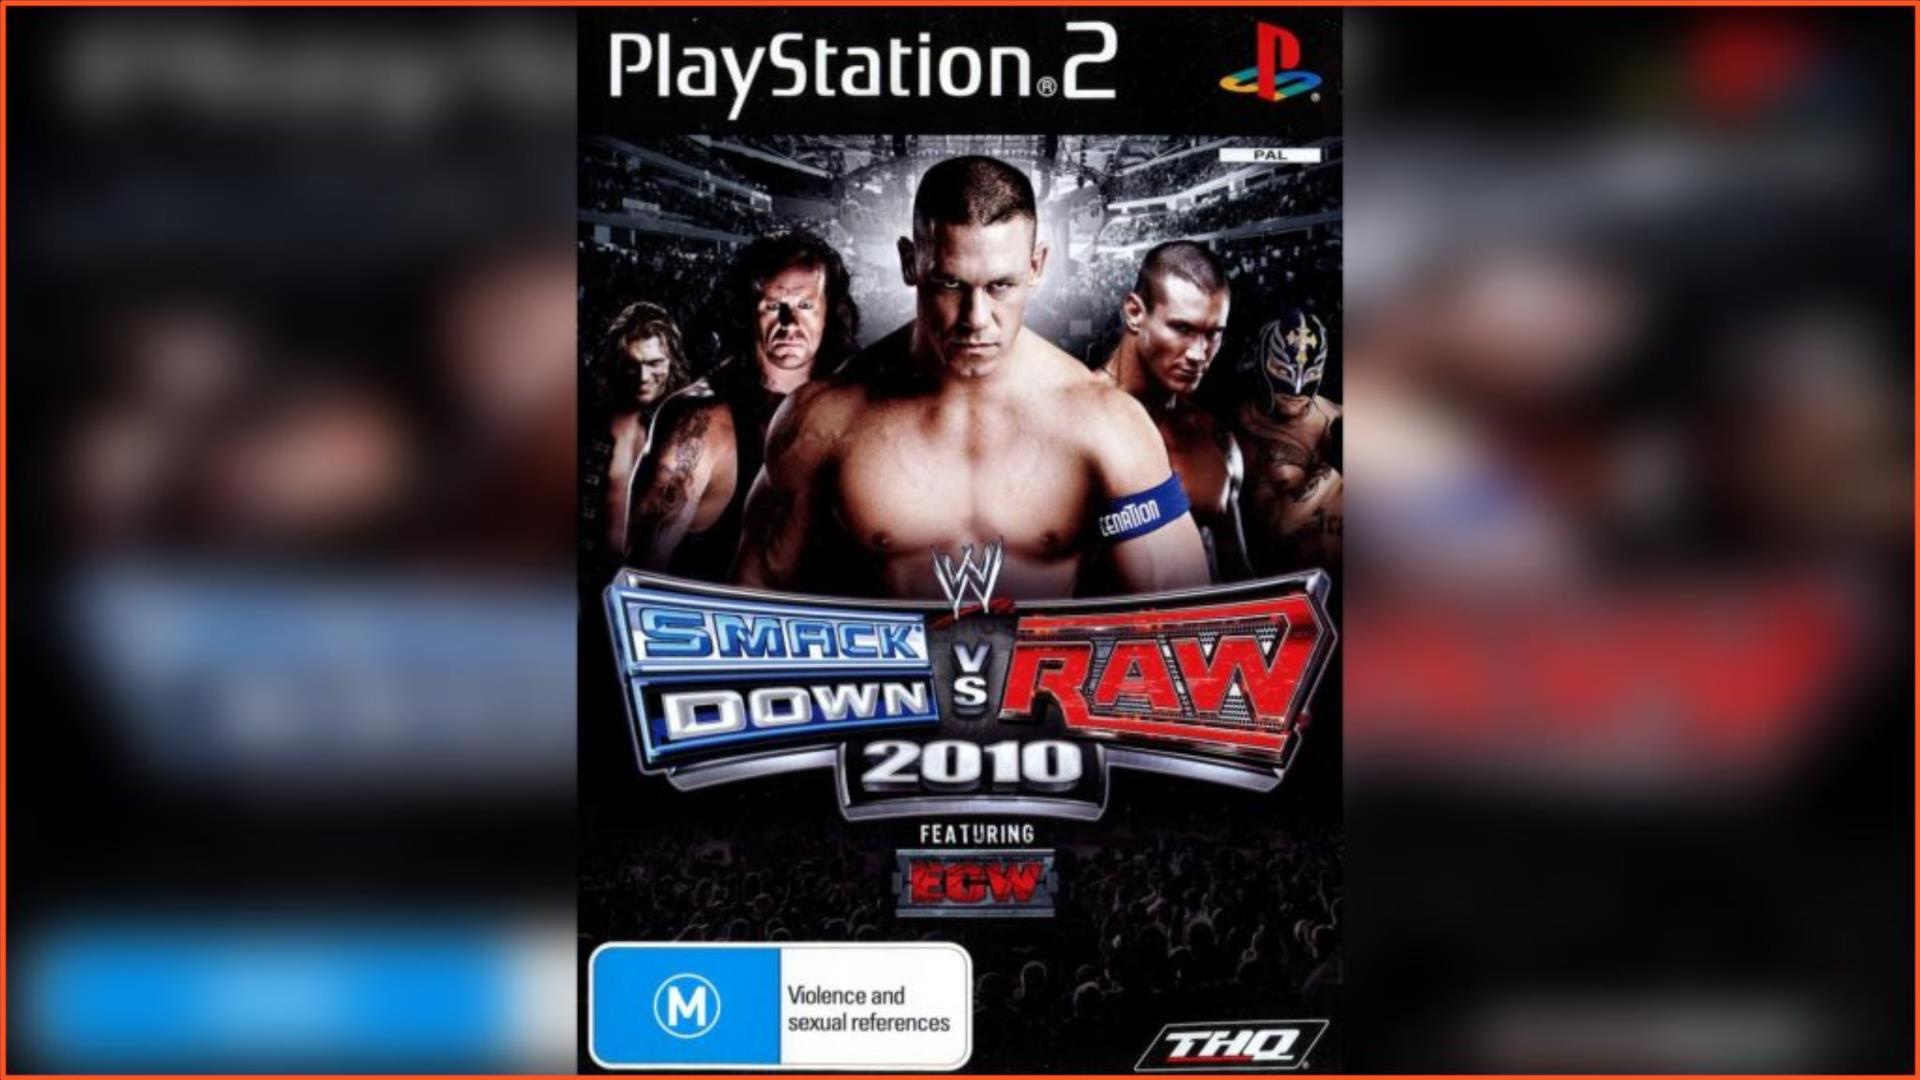 WWE SmackDown! vs. Raw ROM (ISO) Download for Sony Playstation 2 / PS2 